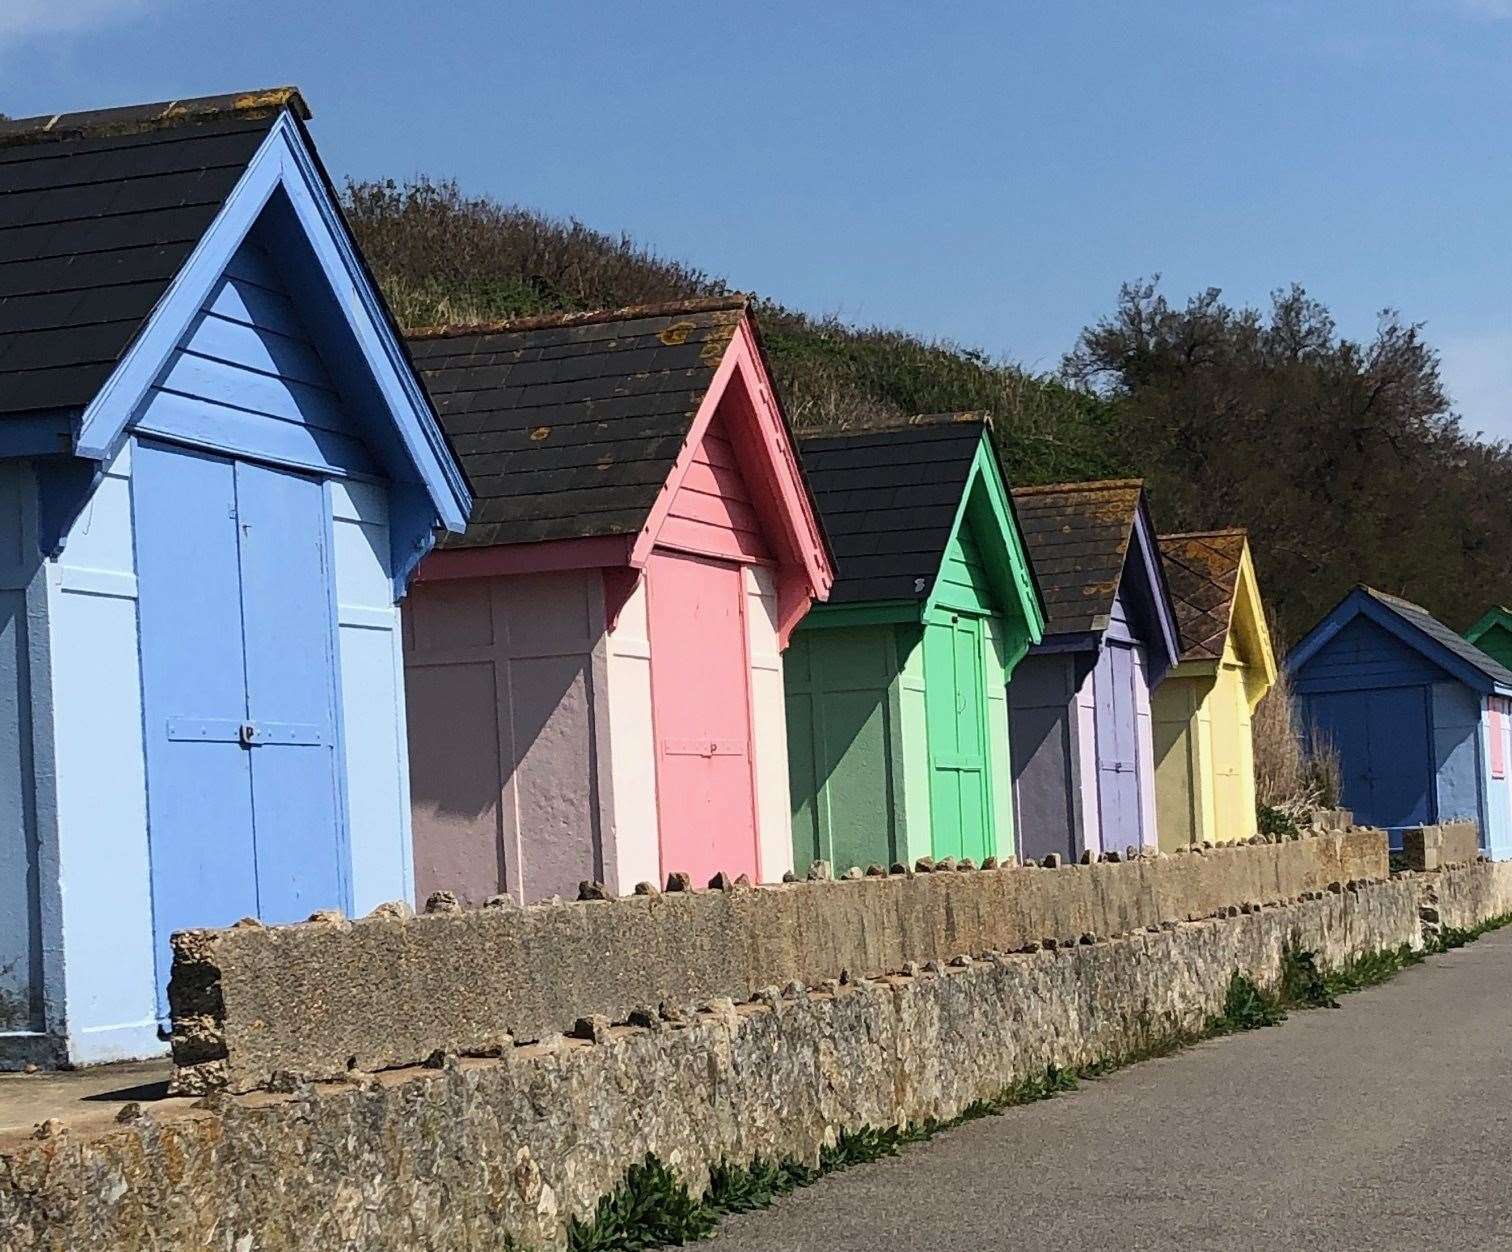 The beach huts in Folkestone are subject to renovation works. Picture: Nicola Tolson